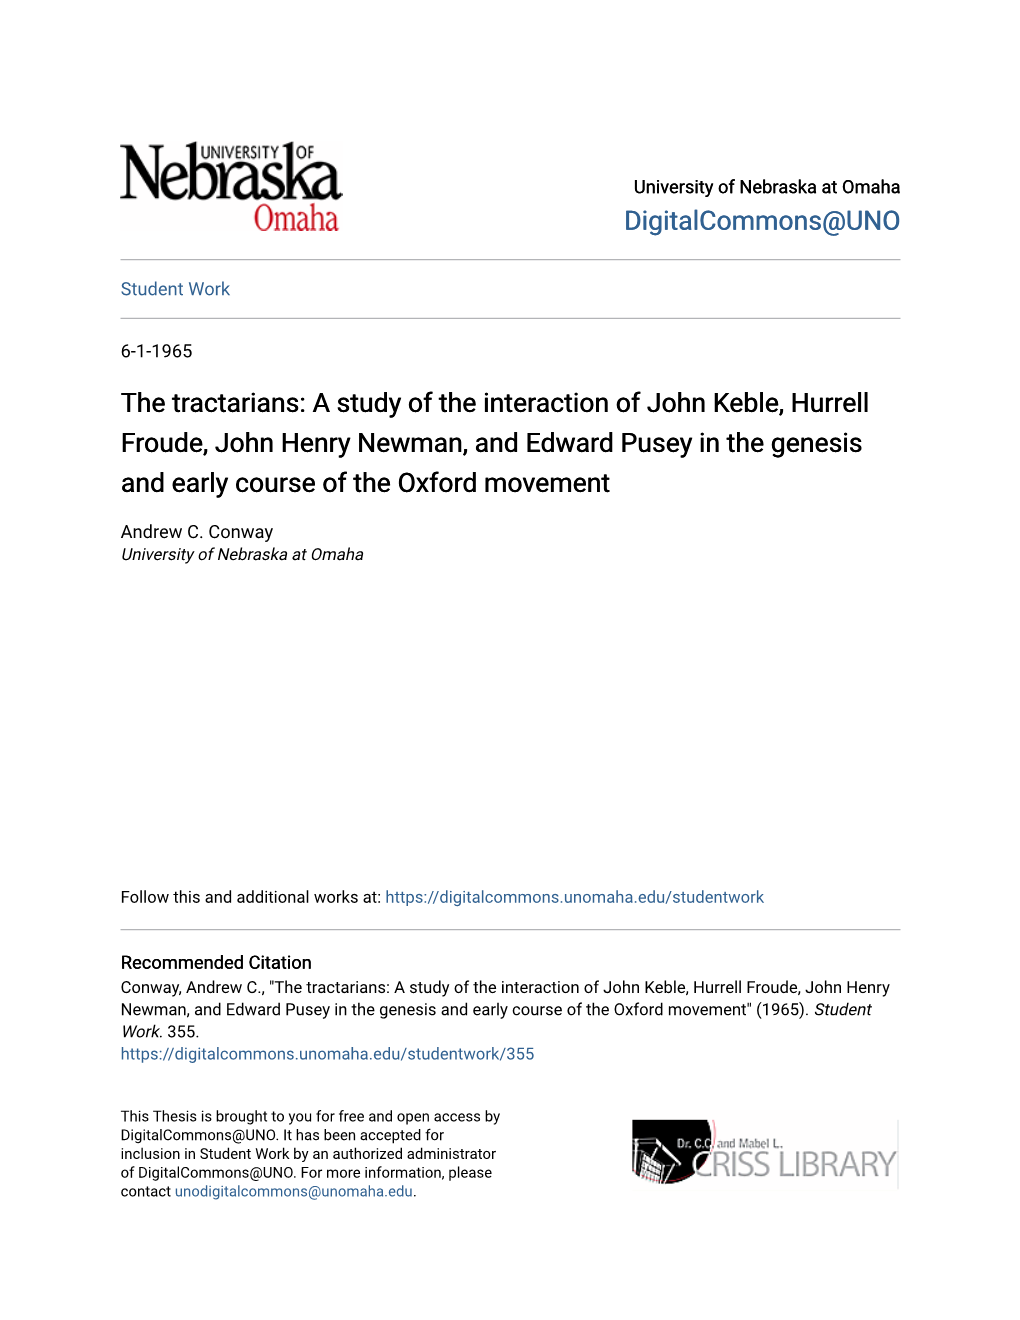 The Tractarians: a Study of the Interaction of John Keble, Hurrell Froude, John Henry Newman, and Edward Pusey in the Genesis and Early Course of the Oxford Movement